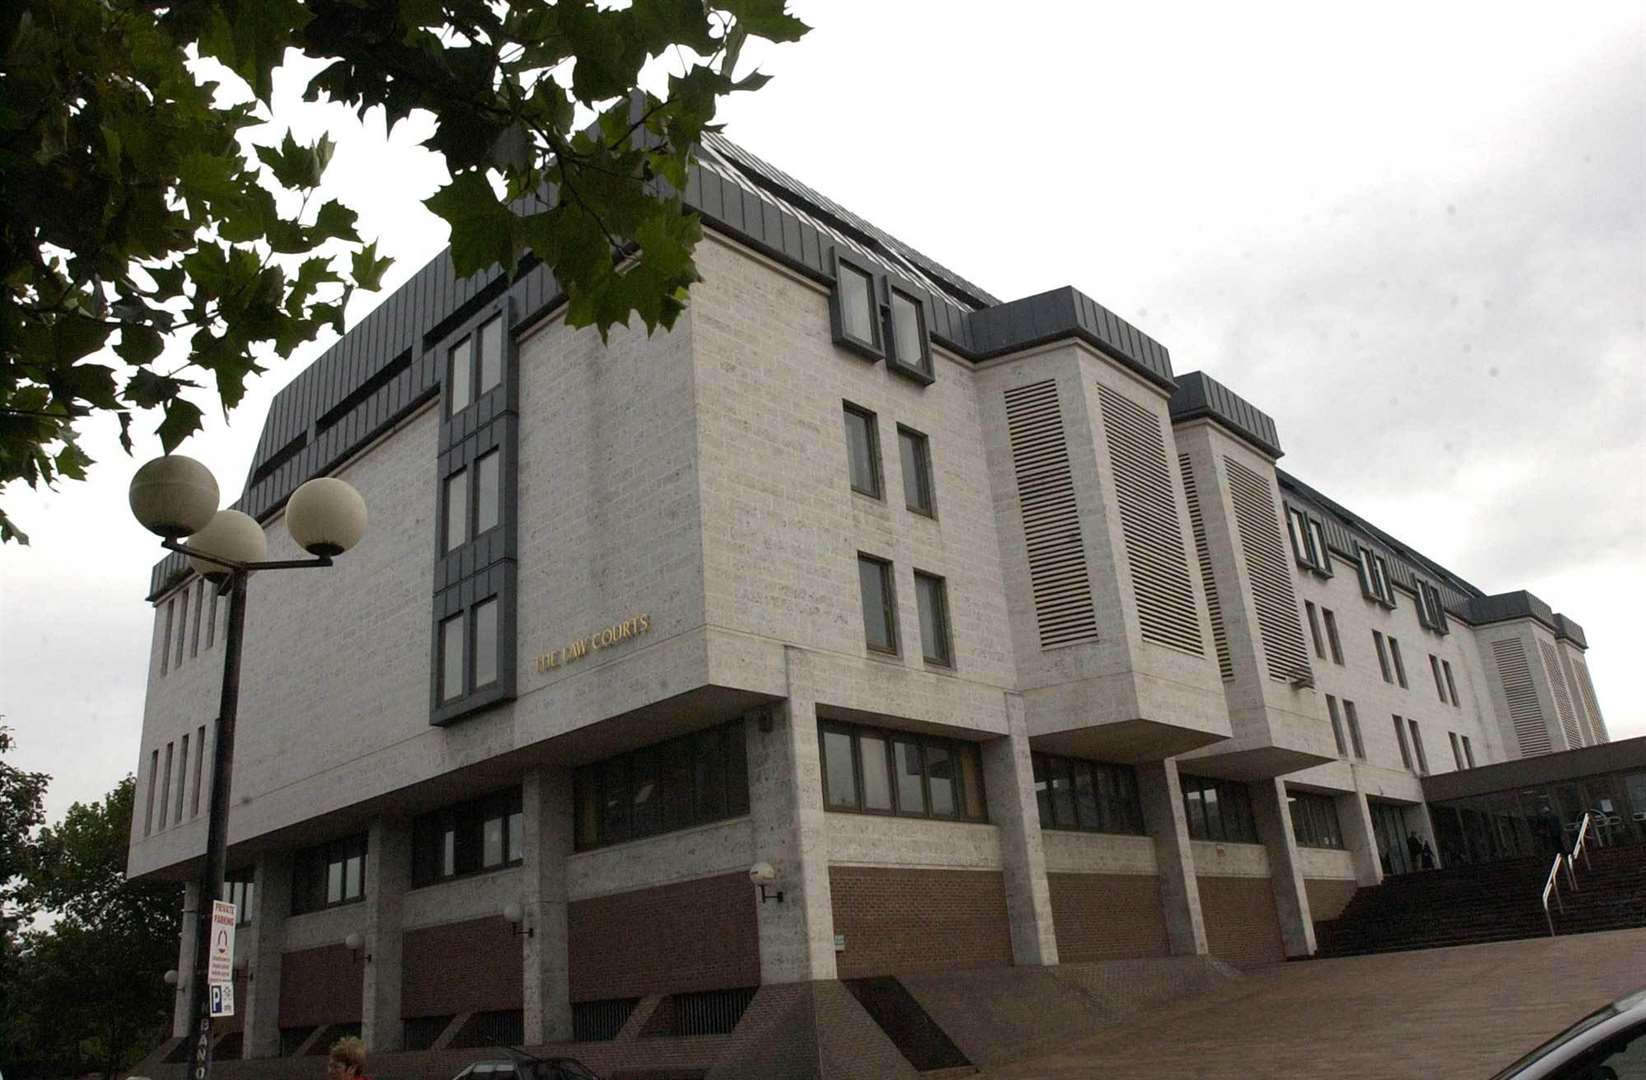 The three pleaded guilty and Maidstone Crown Court